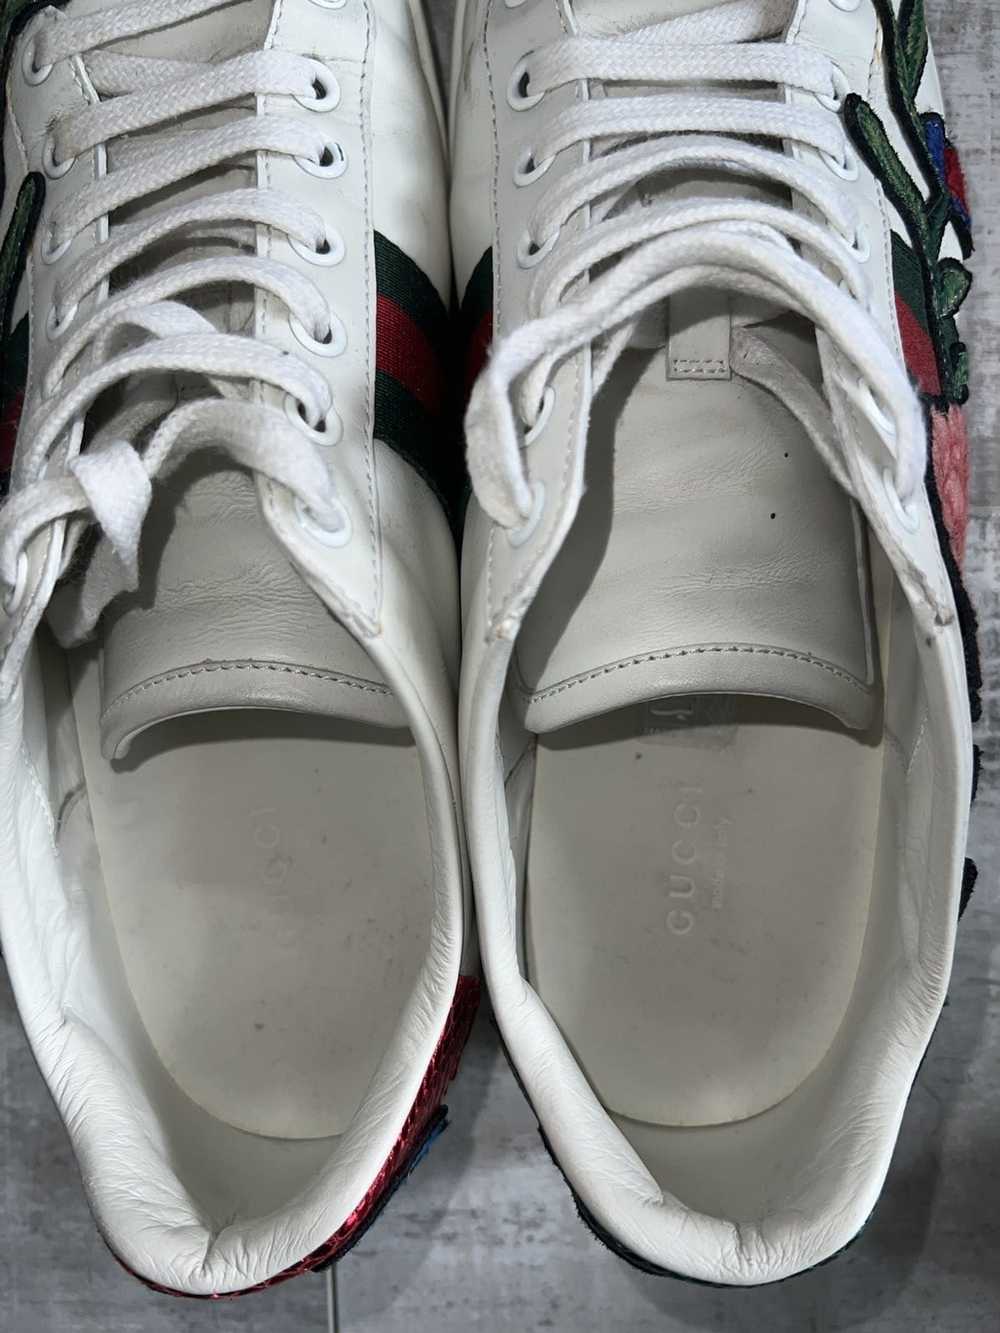 Gucci Gucci Floral Embroidered Ace Sneakers size … - image 9